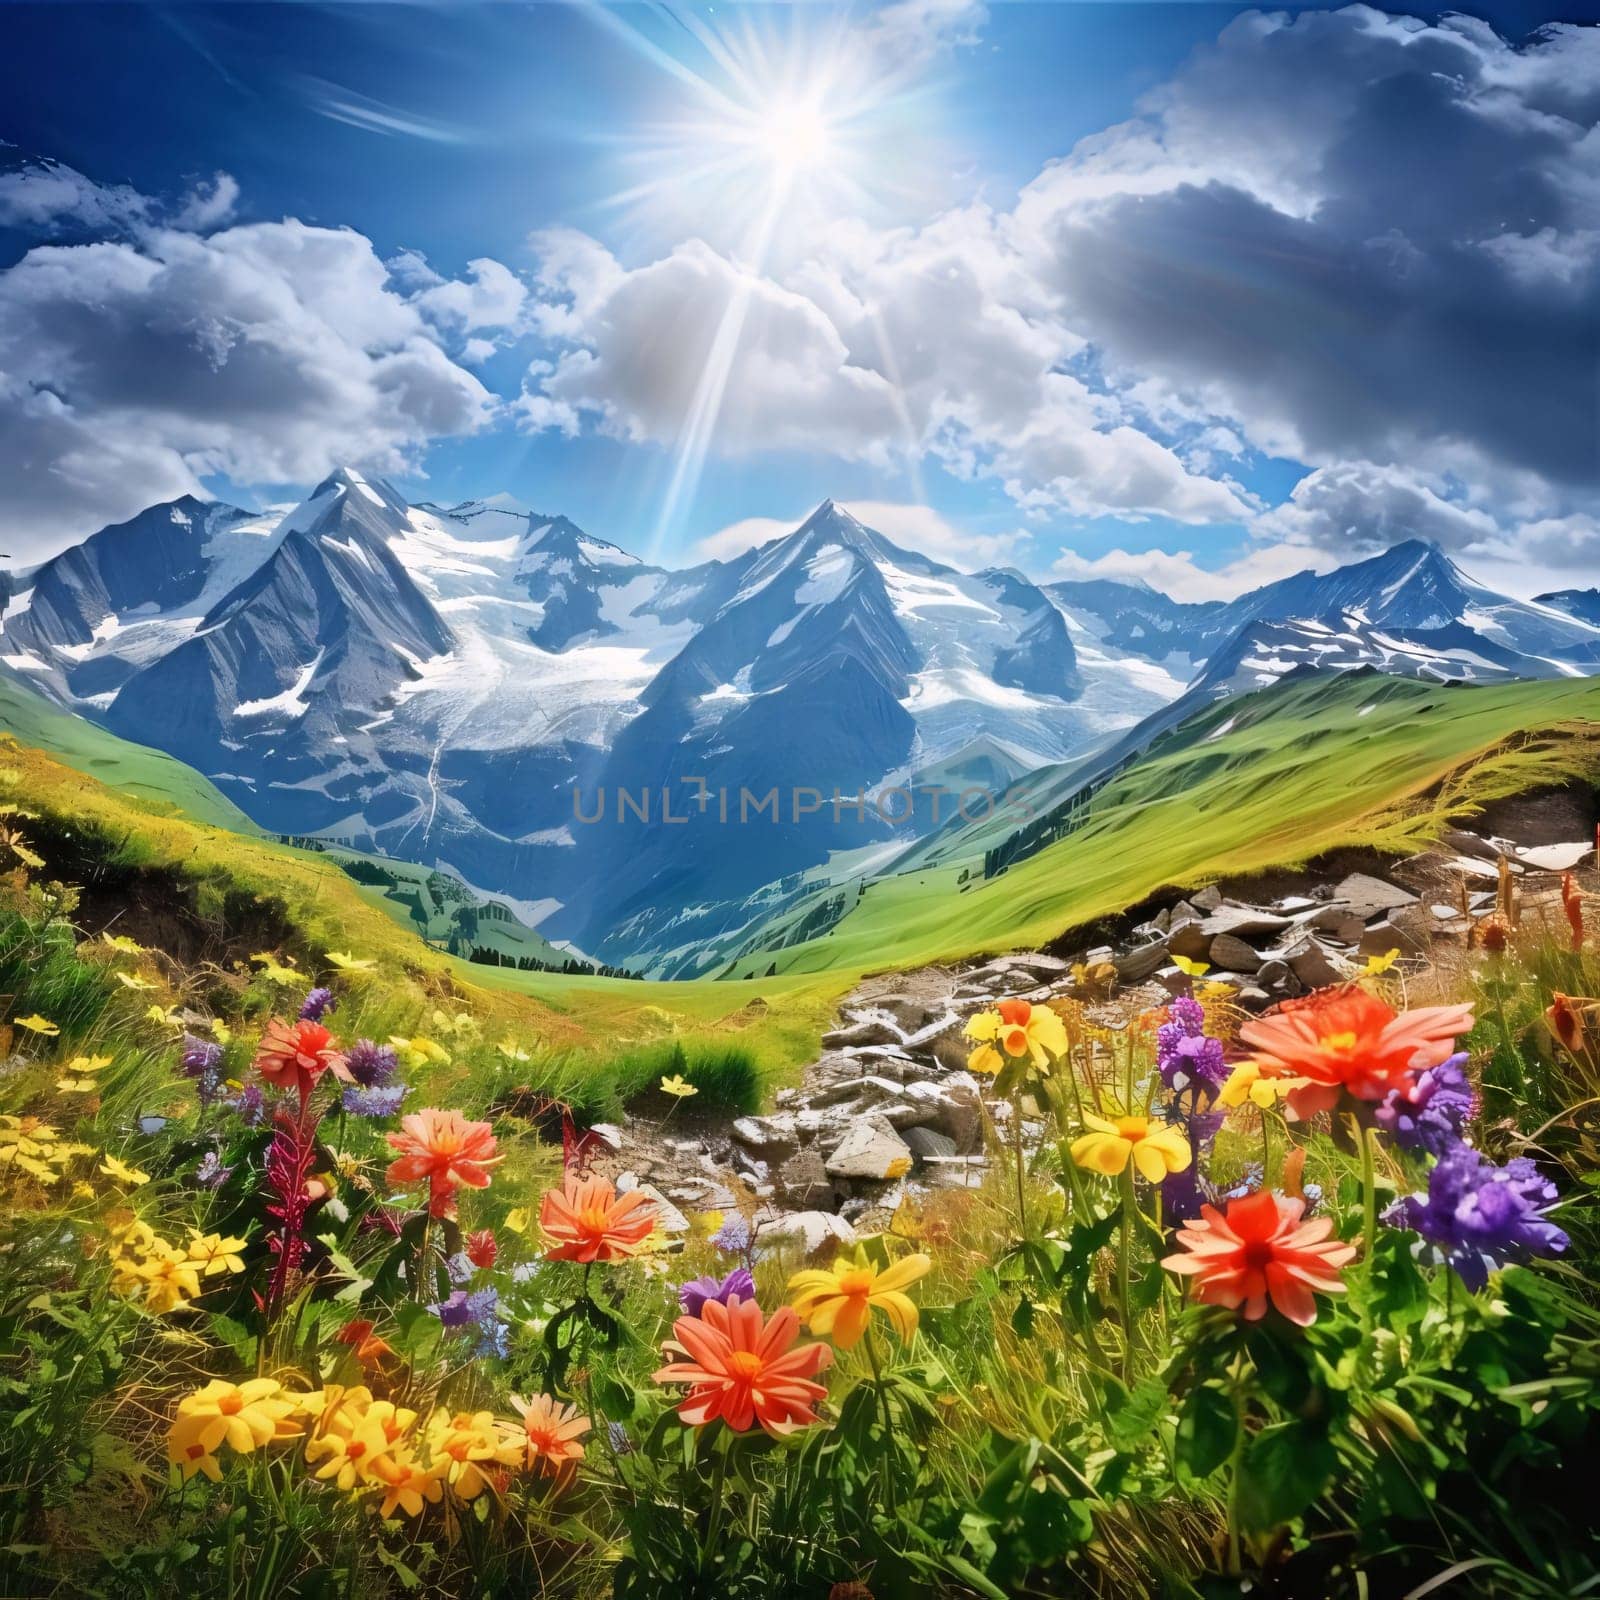 A field full of colorful flowers in the background surrounding valley with a stream and high mountain ranges, the sun shining. Flowering flowers, a symbol of spring, new life. A joyful time of nature waking up to life.